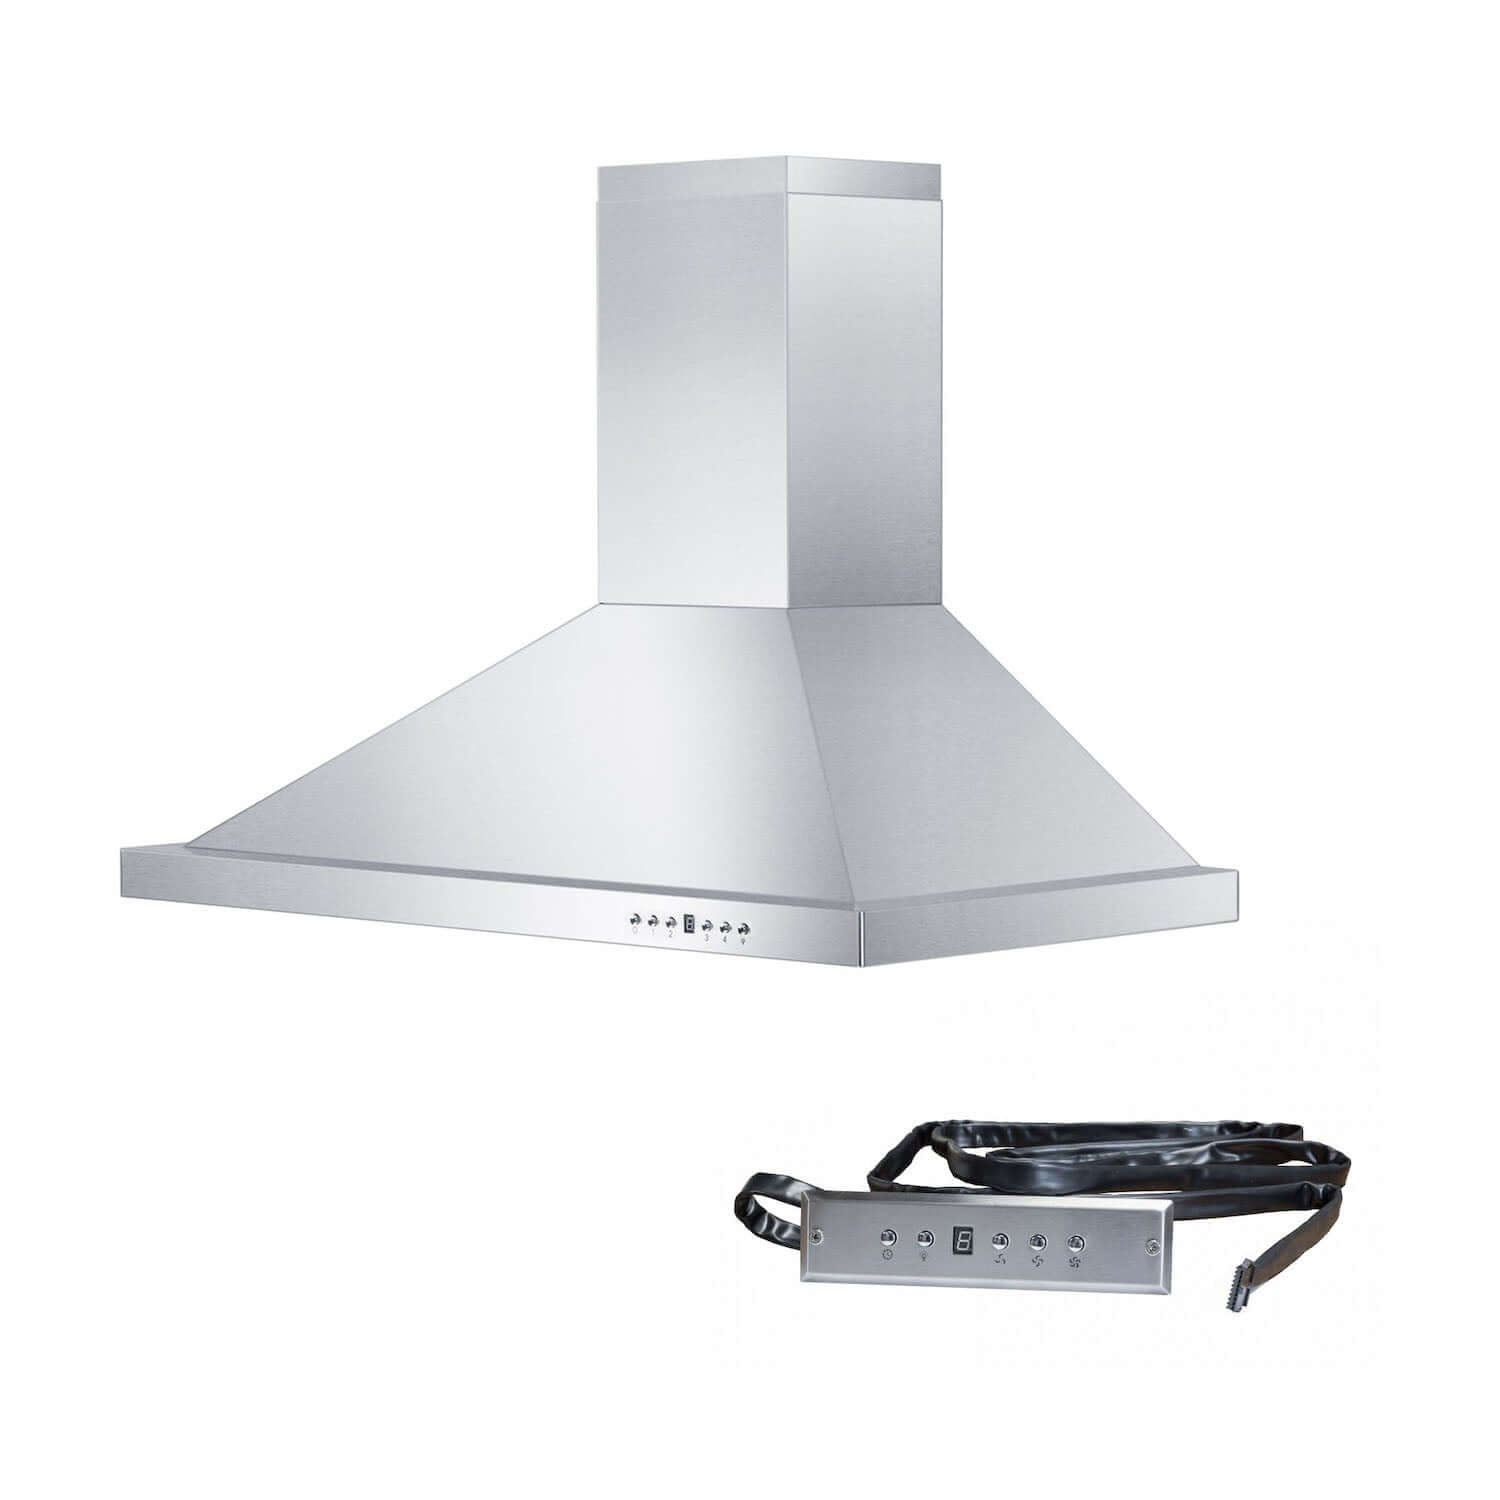 ZLINE Stainless Steel Convertible Vent Wall Mount Range Hood and button panel.